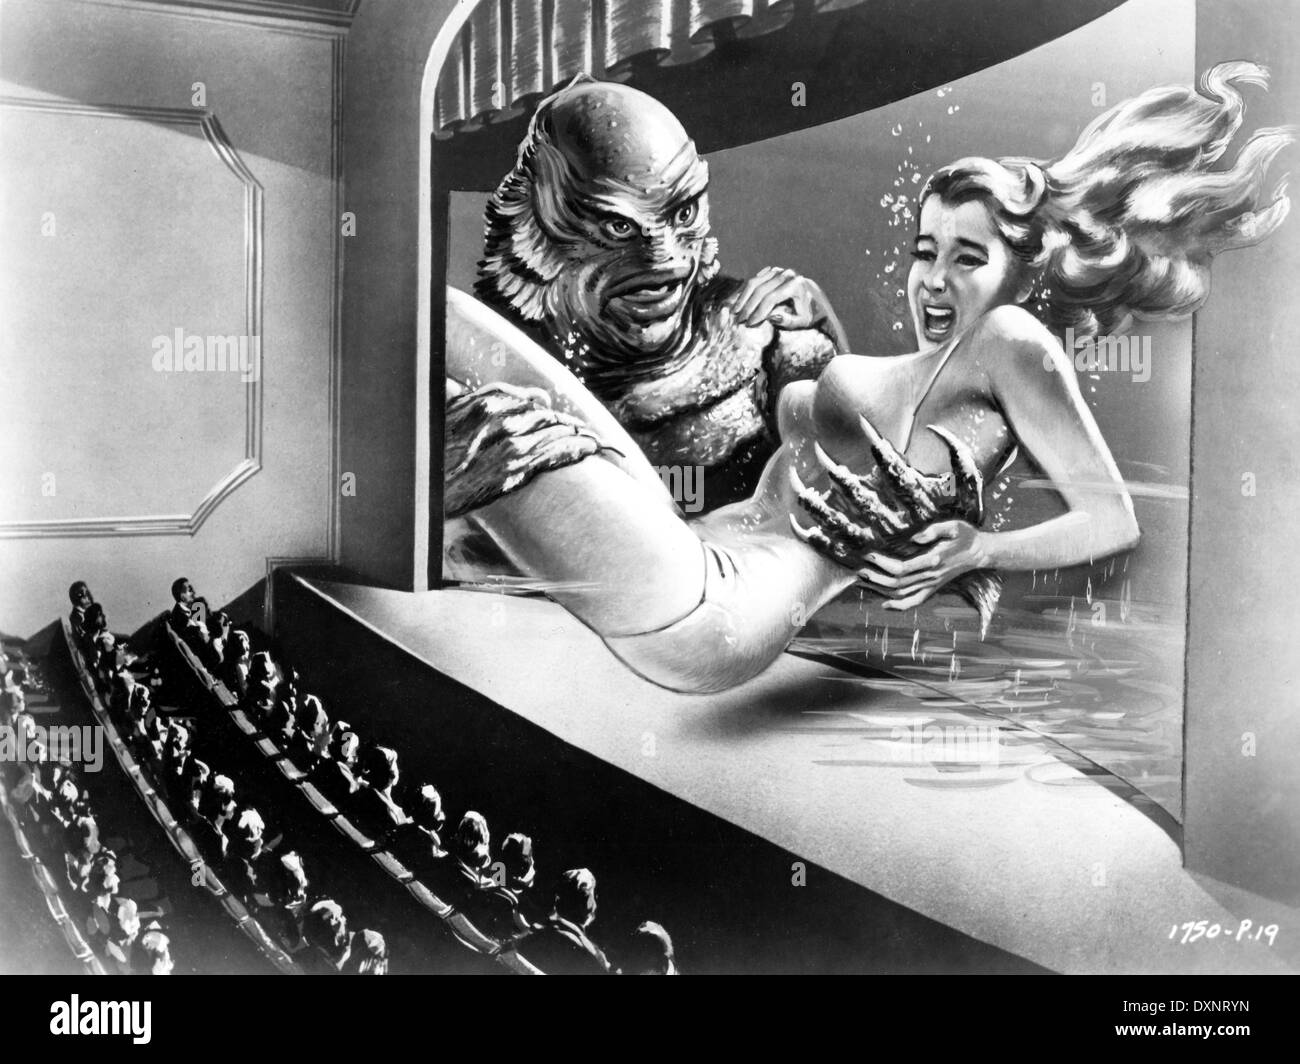 CREATURE FROM THE BLACK LAGOON Stock Photo